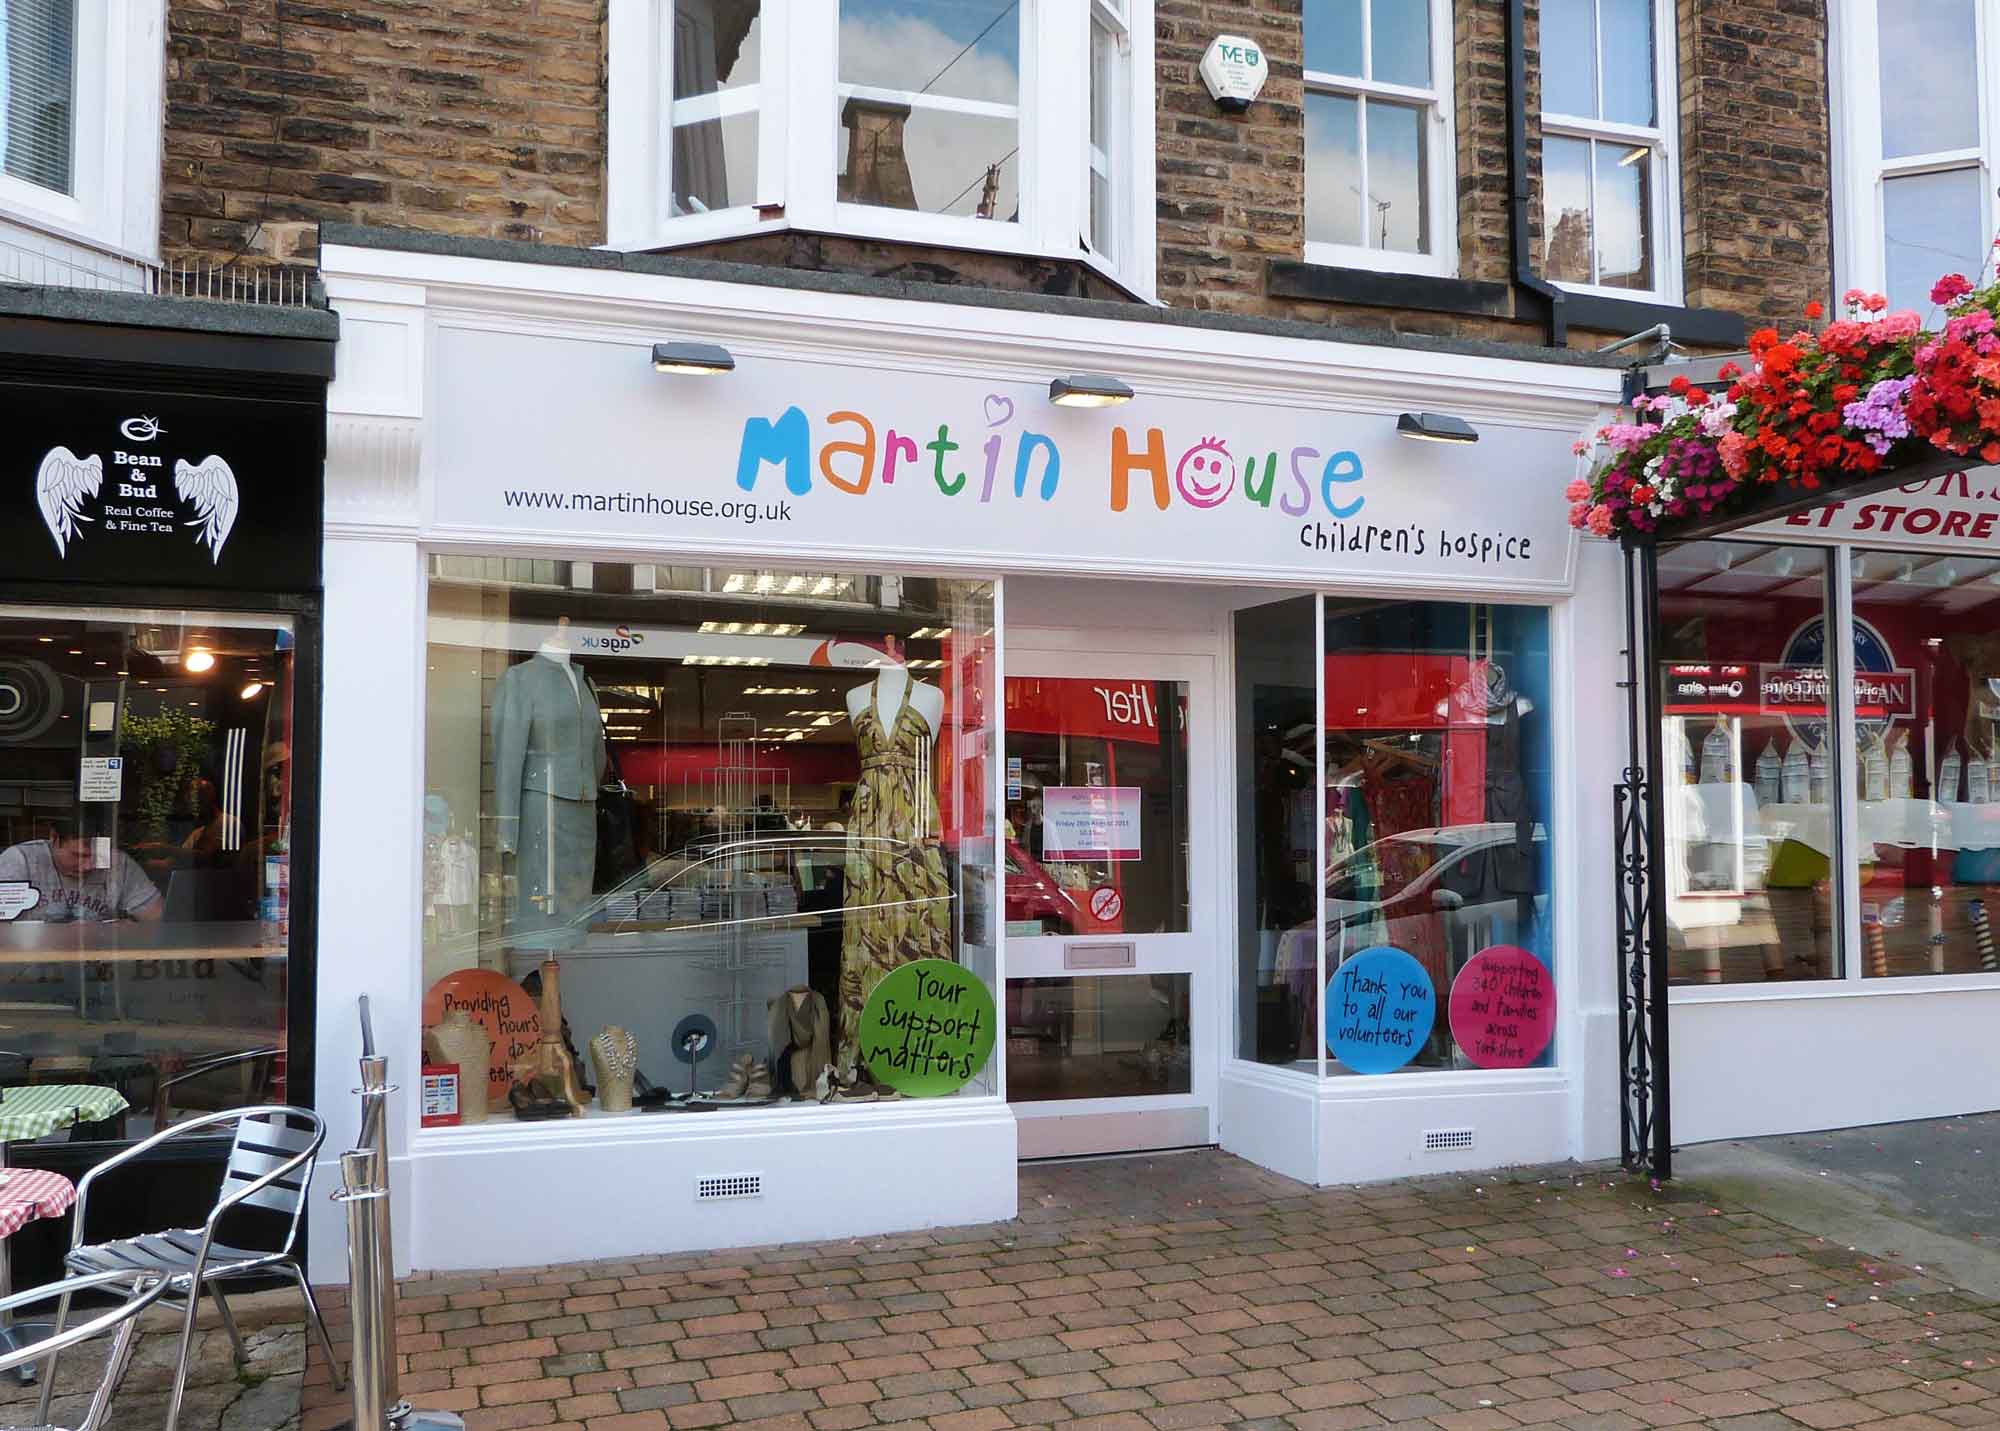 Martin House’s shops are reopening after lockdown